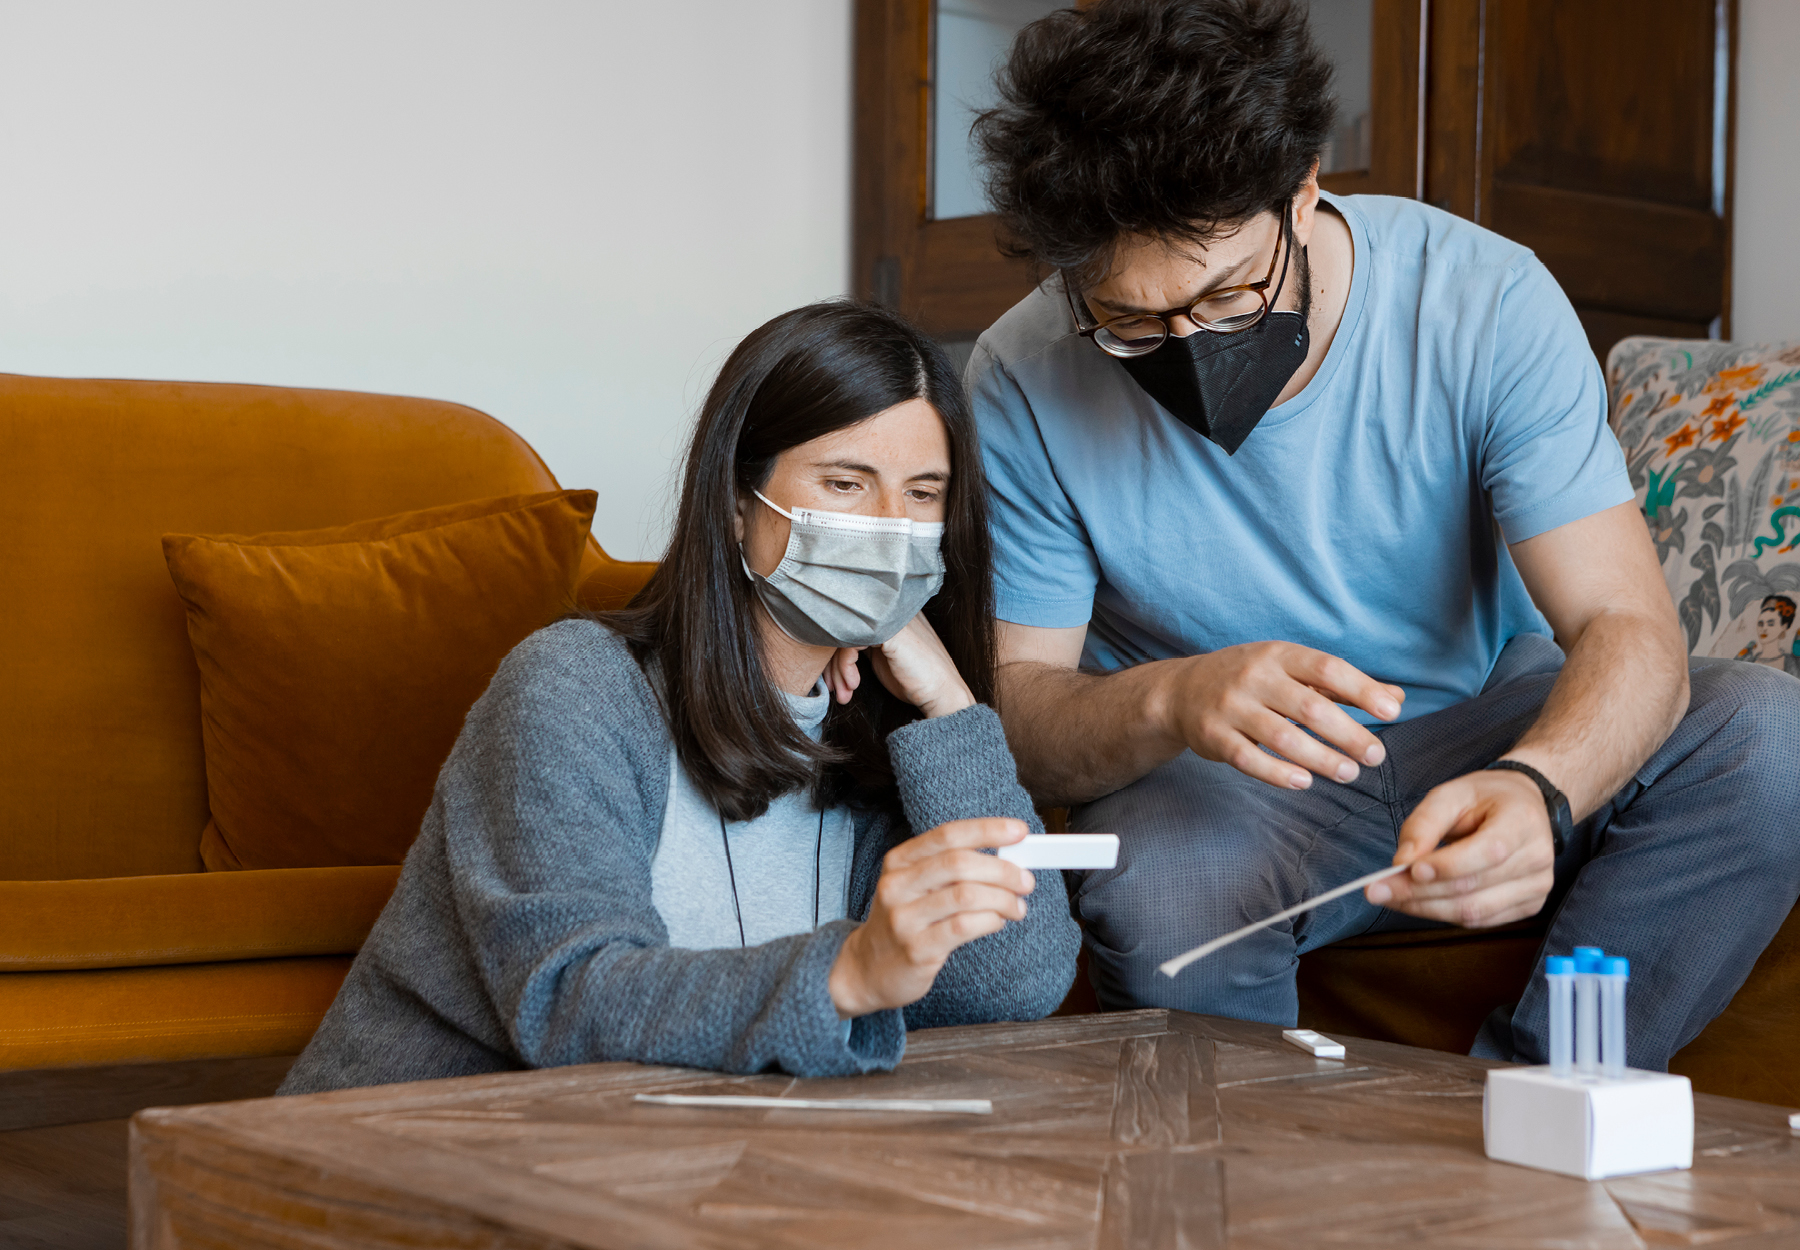 A man and woman examine the results of a COVID-19 rapid test in their living room.